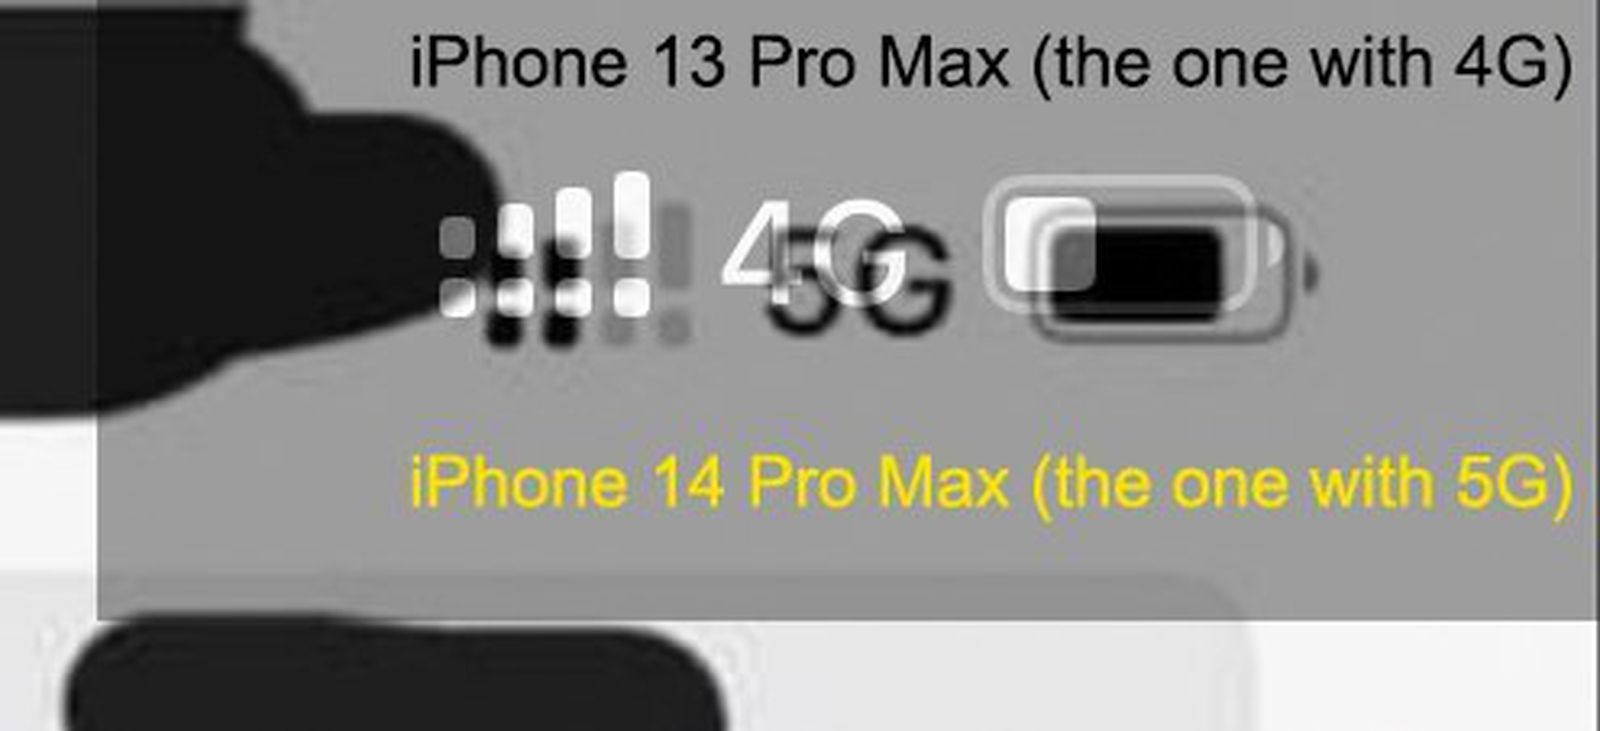 Screenshot of slightly rearranged status bar items on iPhone 14 Pro Max screenshot compared to iPhone 13 Pro Max